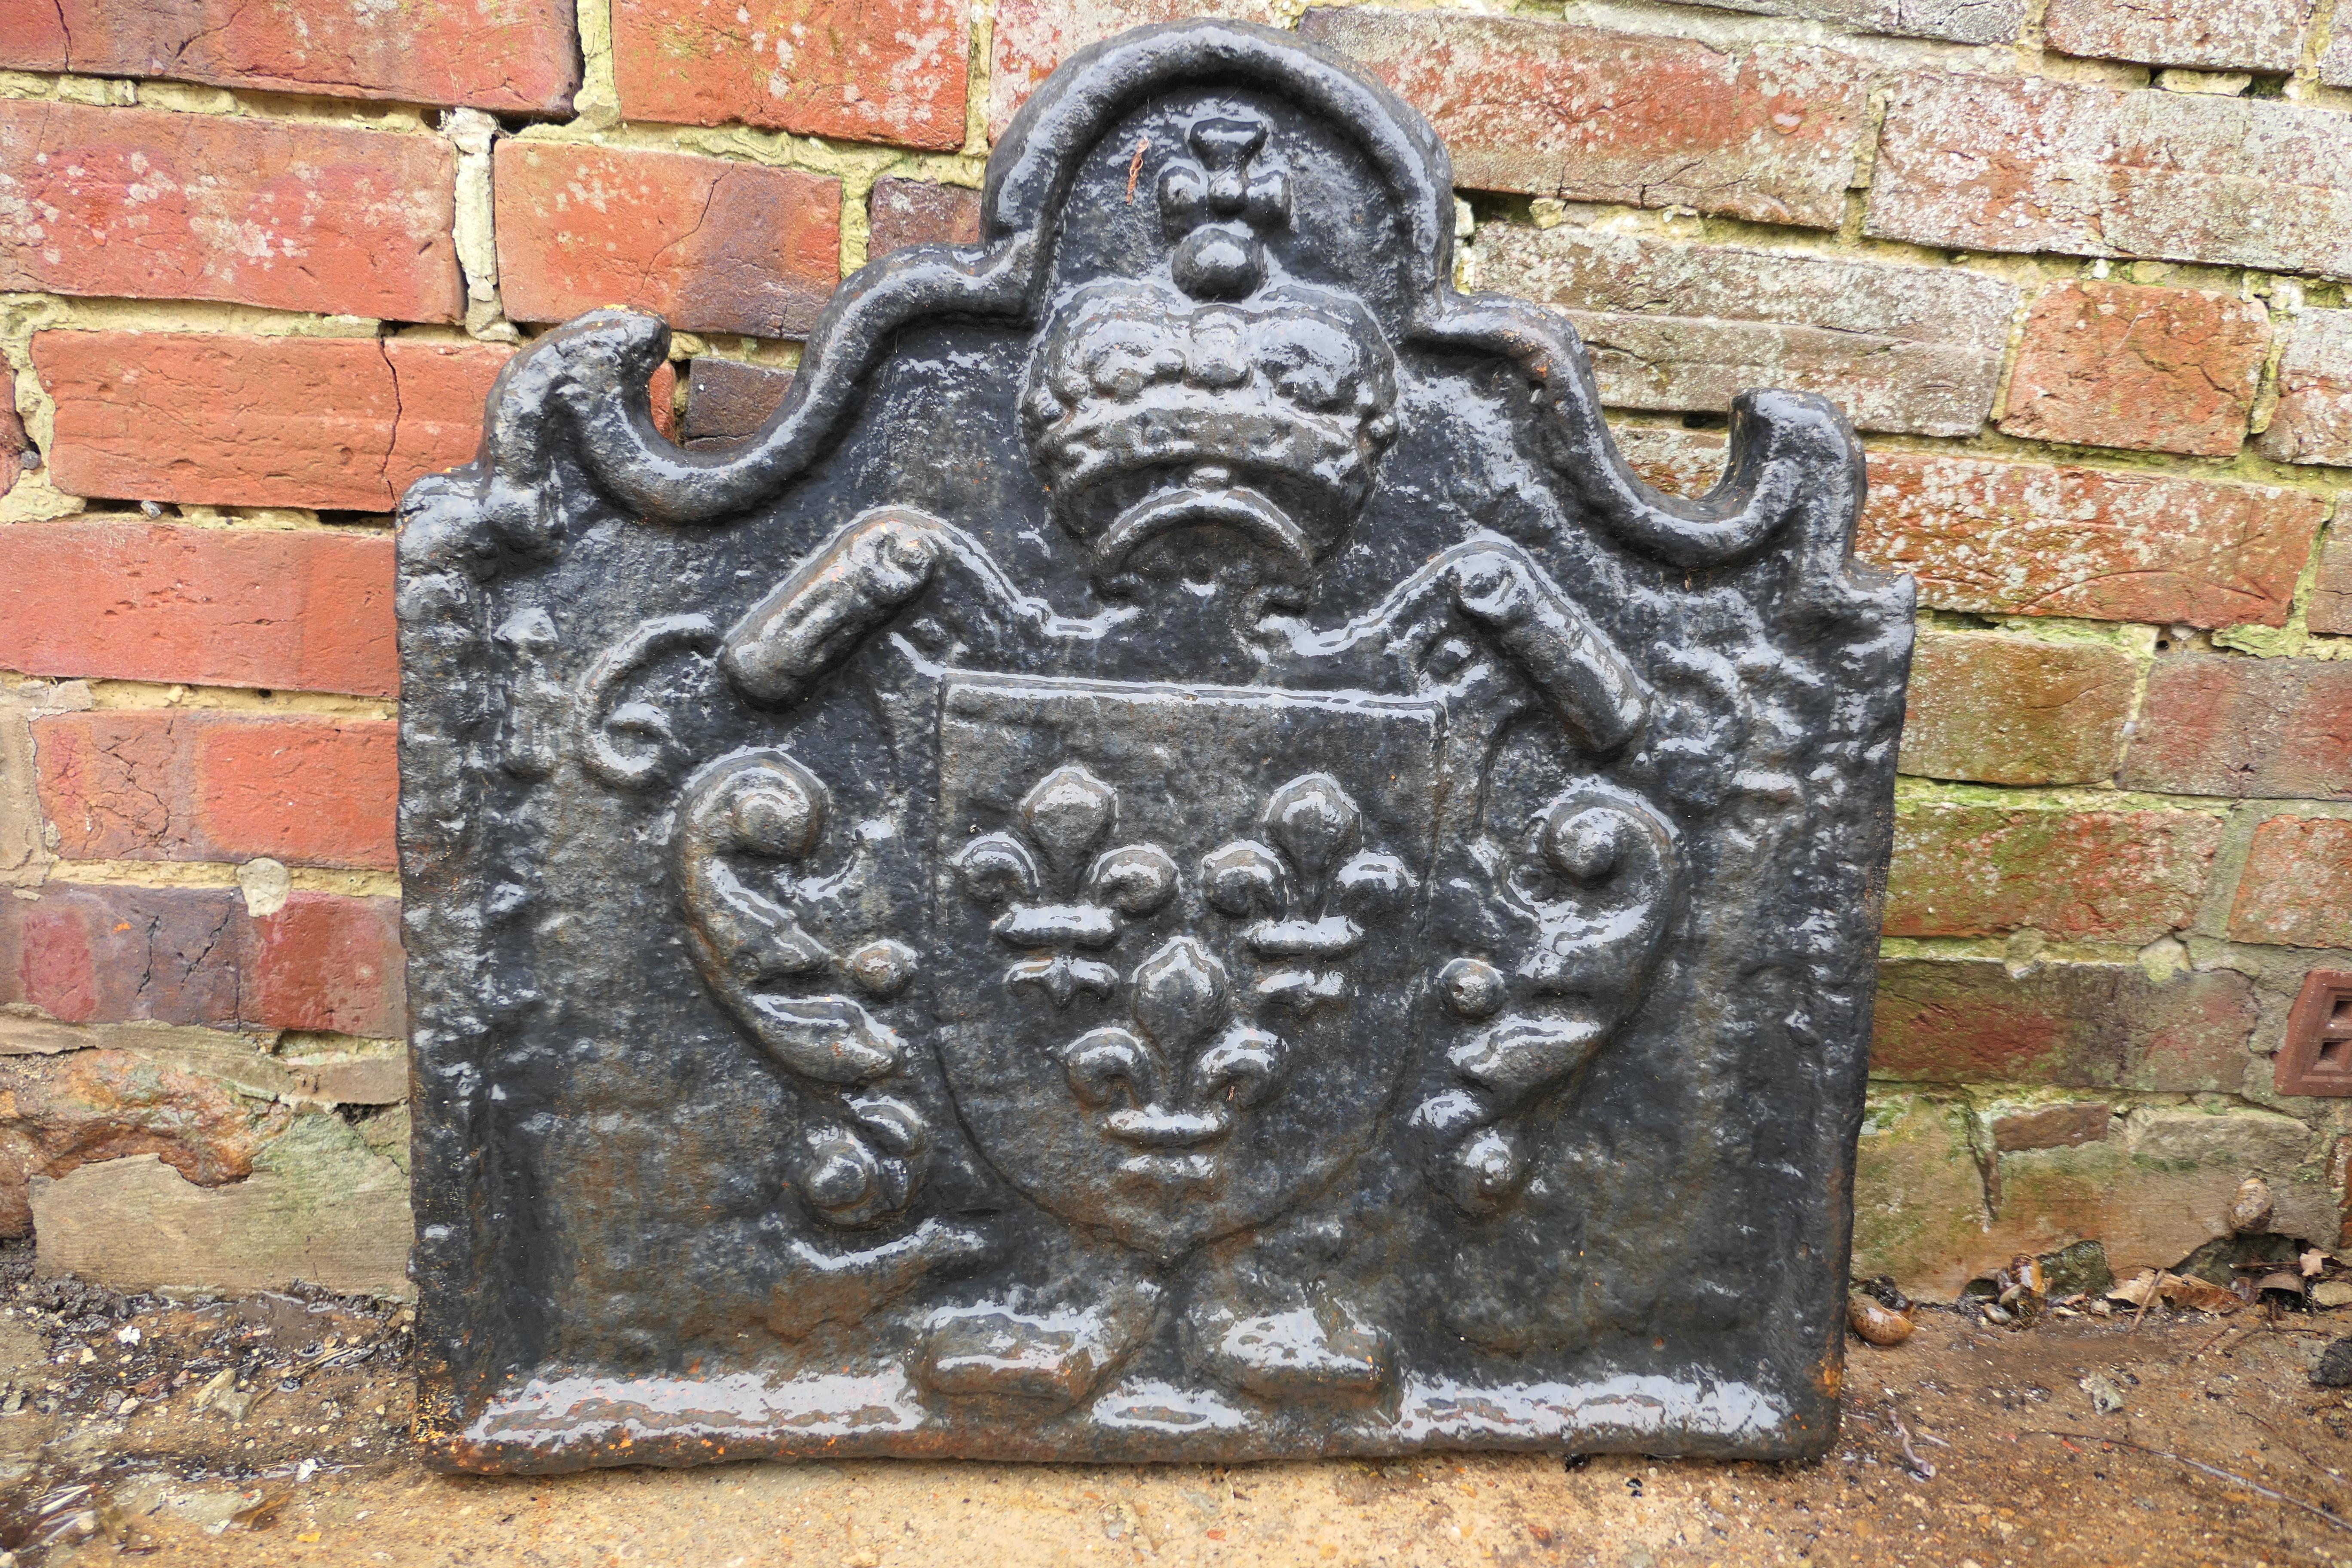 Antique French cast iron fire back

The Fire back is extremely heavy, it is decorated with the “Armes de France” with the Crest of the House of Bourbon 

The crest consists of a crown with 3 fleurs de lys and the date 1622 is clearly seen
Size